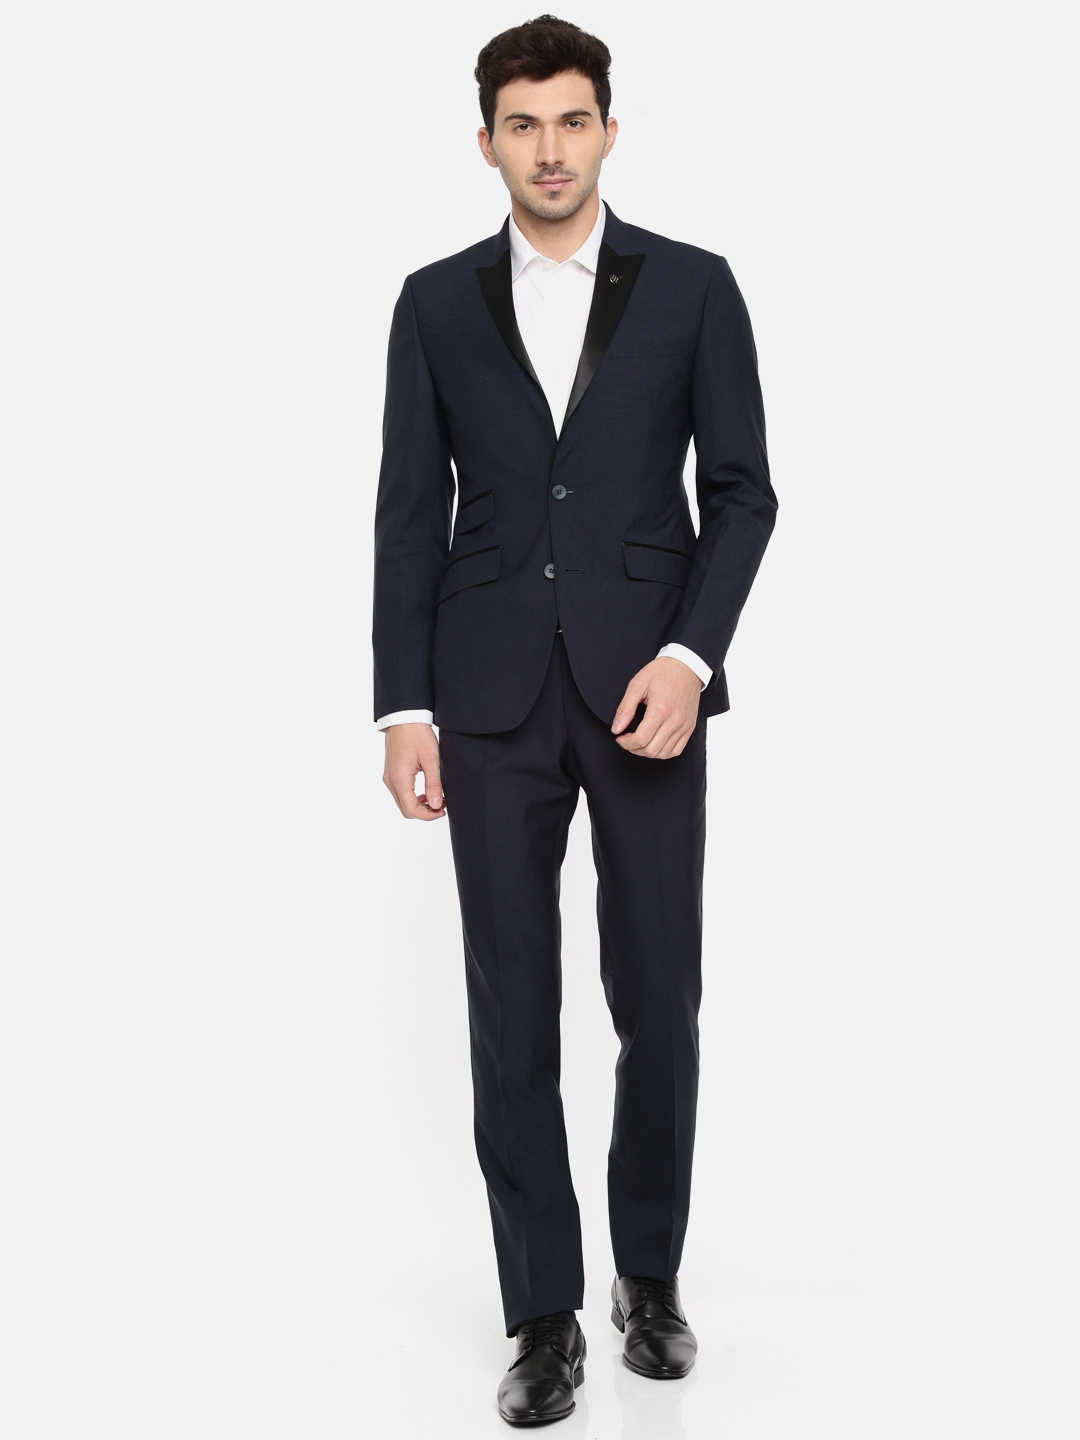 Raymond suits | Fashion suits for men, Winter outfits men, Mens outfits-as247.edu.vn